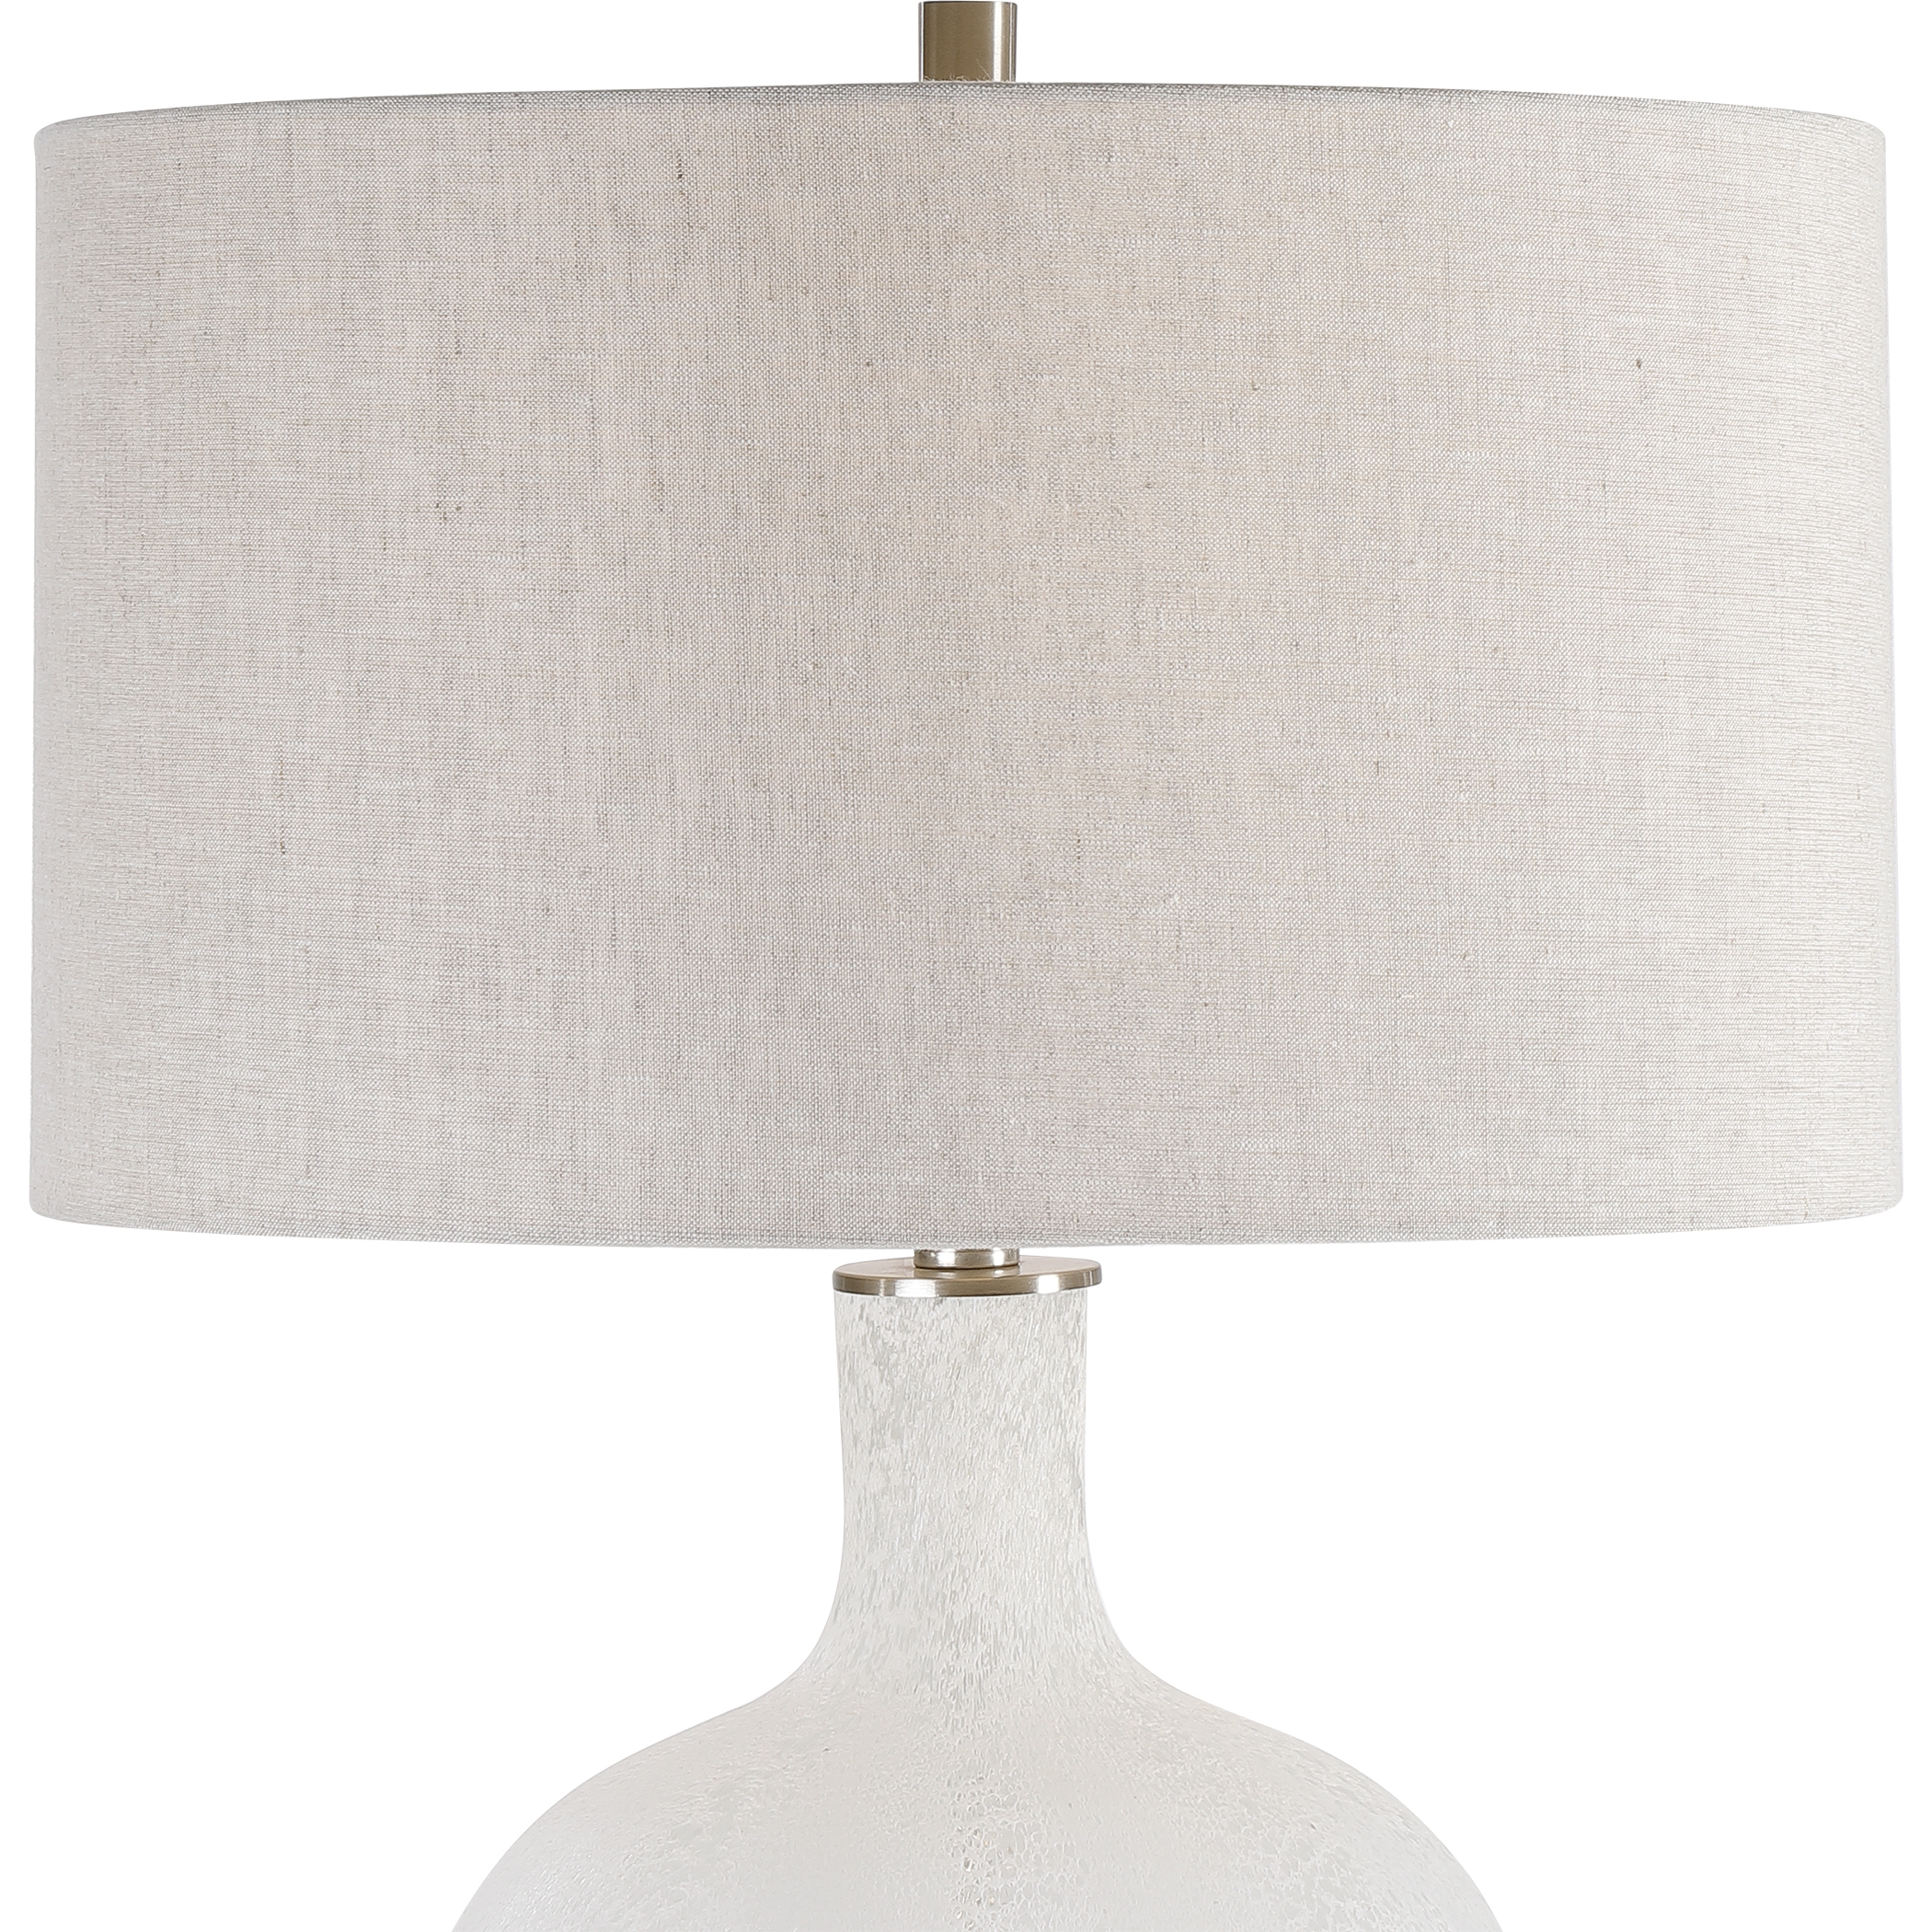 Whiteout Mottled Glass Table Lamp - Image 4